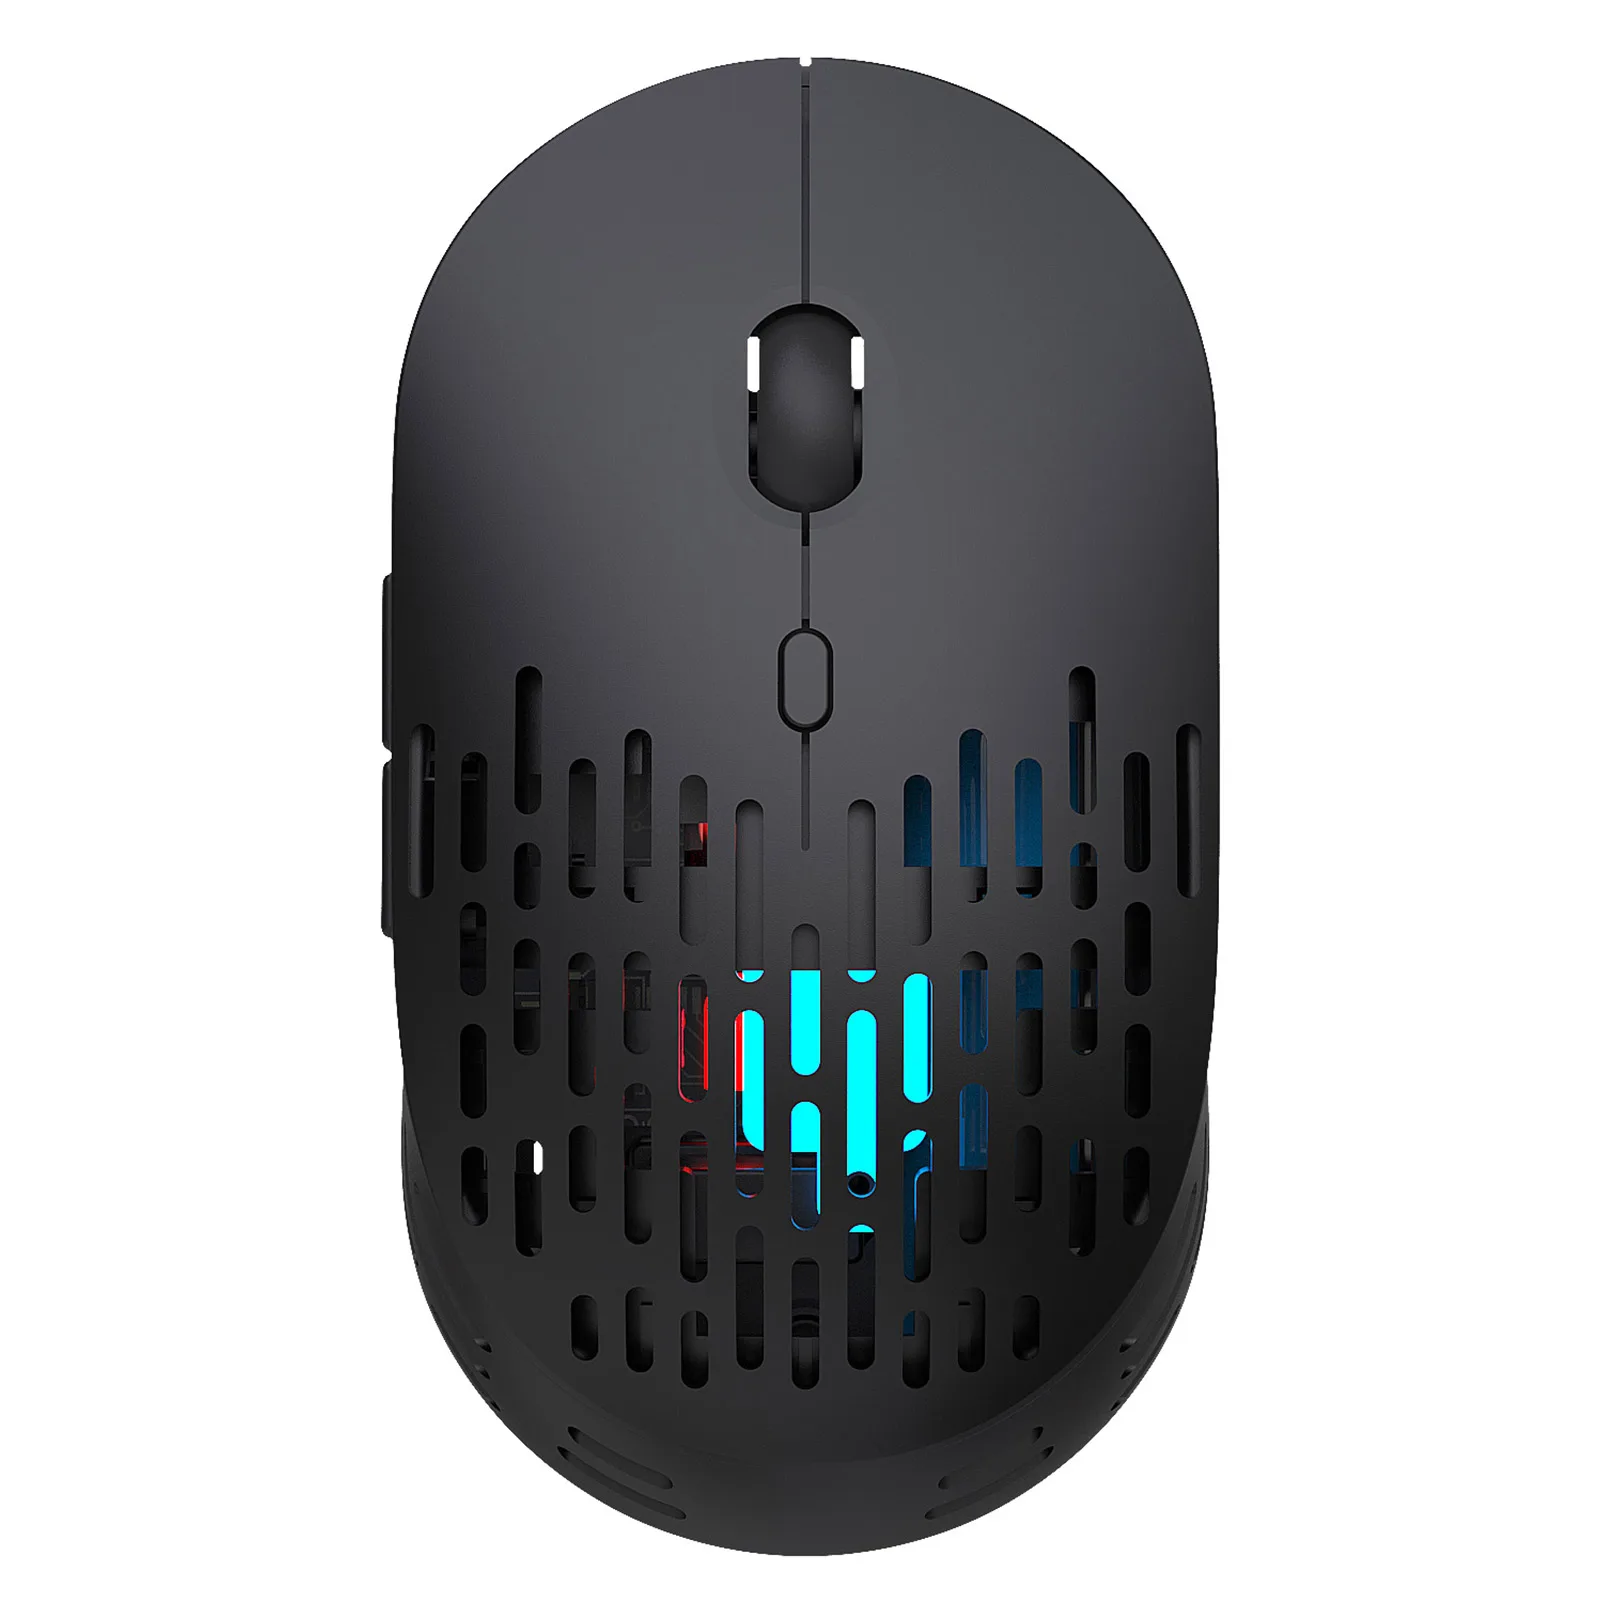 Office Notebook Mice Mouse Pro Gamer 2.4G Wireless Mouse Mice Hollow Out Design 800-1200-1600 DPI Optical Mice for PC digital mouse Mice